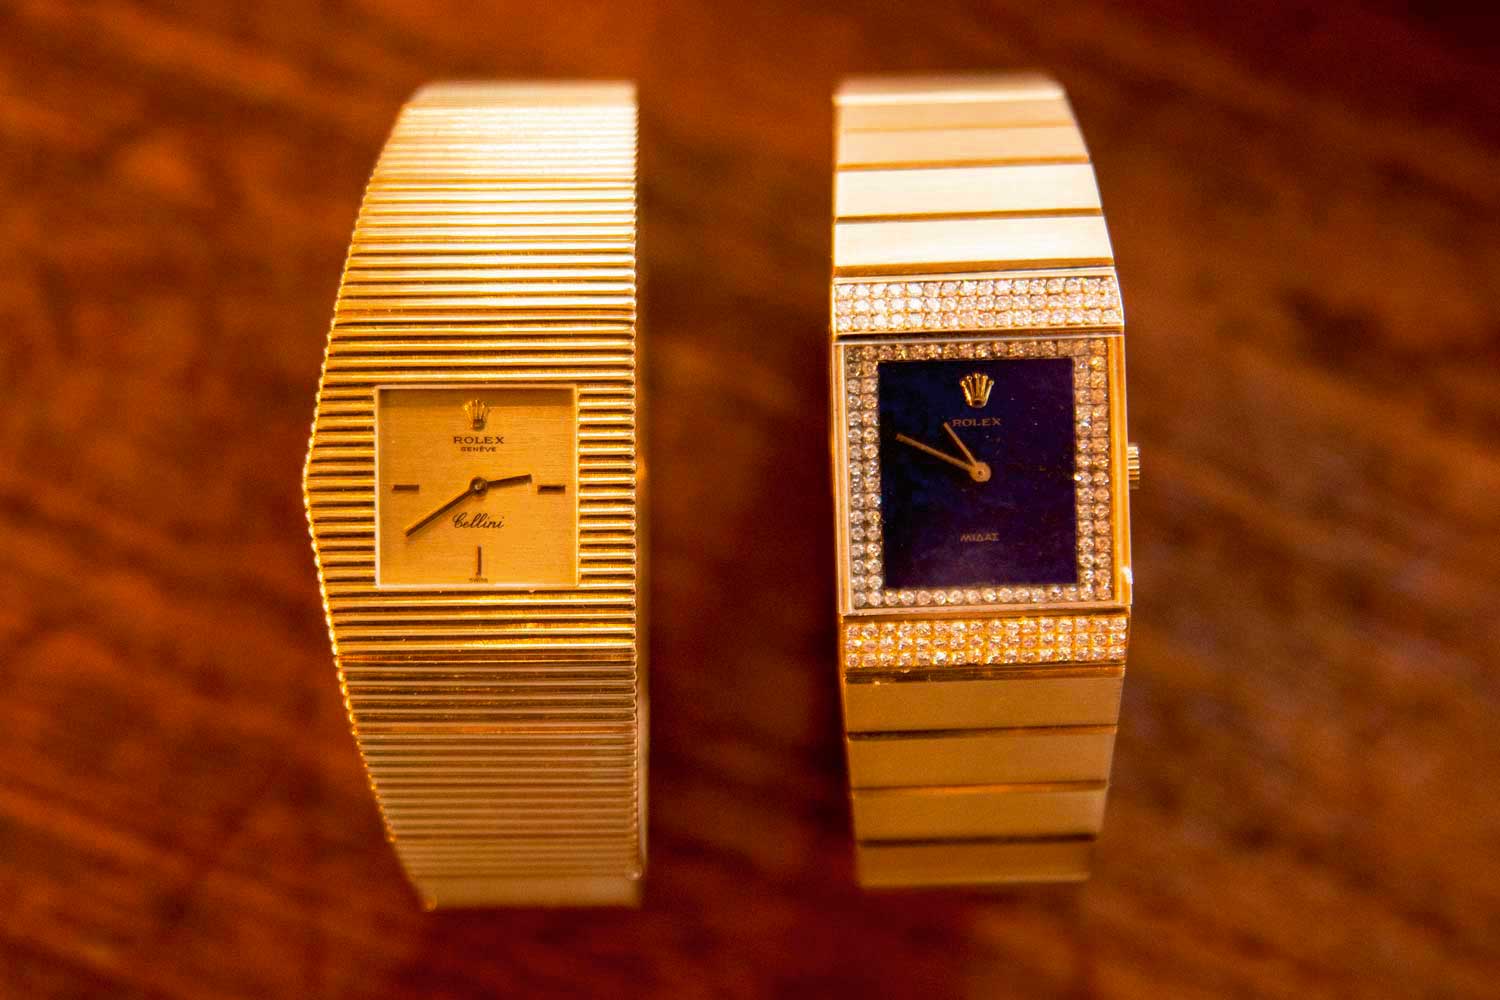 Later versions of the King Midas lost the asymmetrical case design, like the ref. 4611 (right) in yellow gold with lapis lazuli dial (©Revolution)